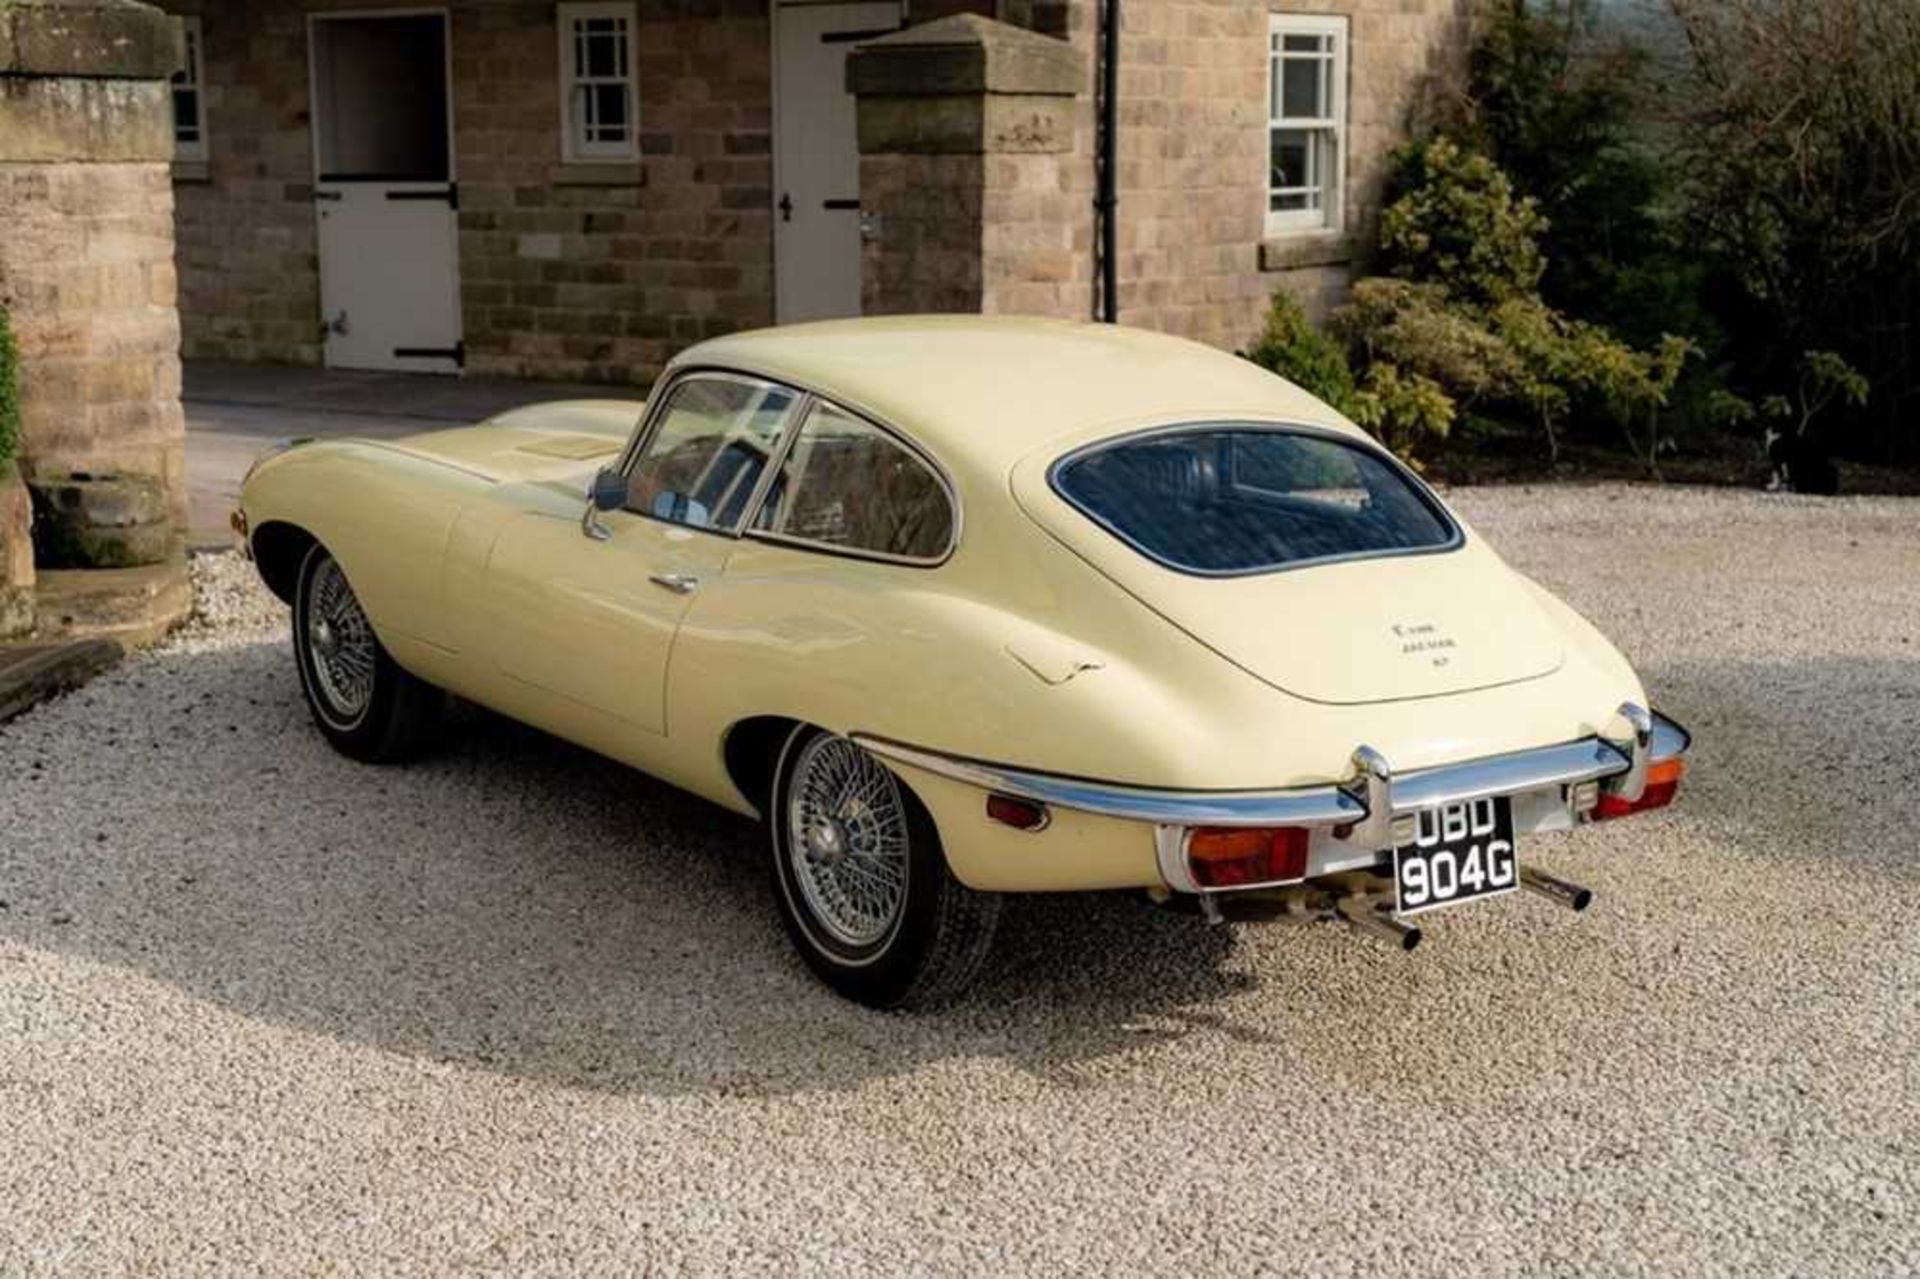 1968 Jaguar E-Type 4.2 Litre Coupe Genuine 44,000 miles from new - Image 7 of 68